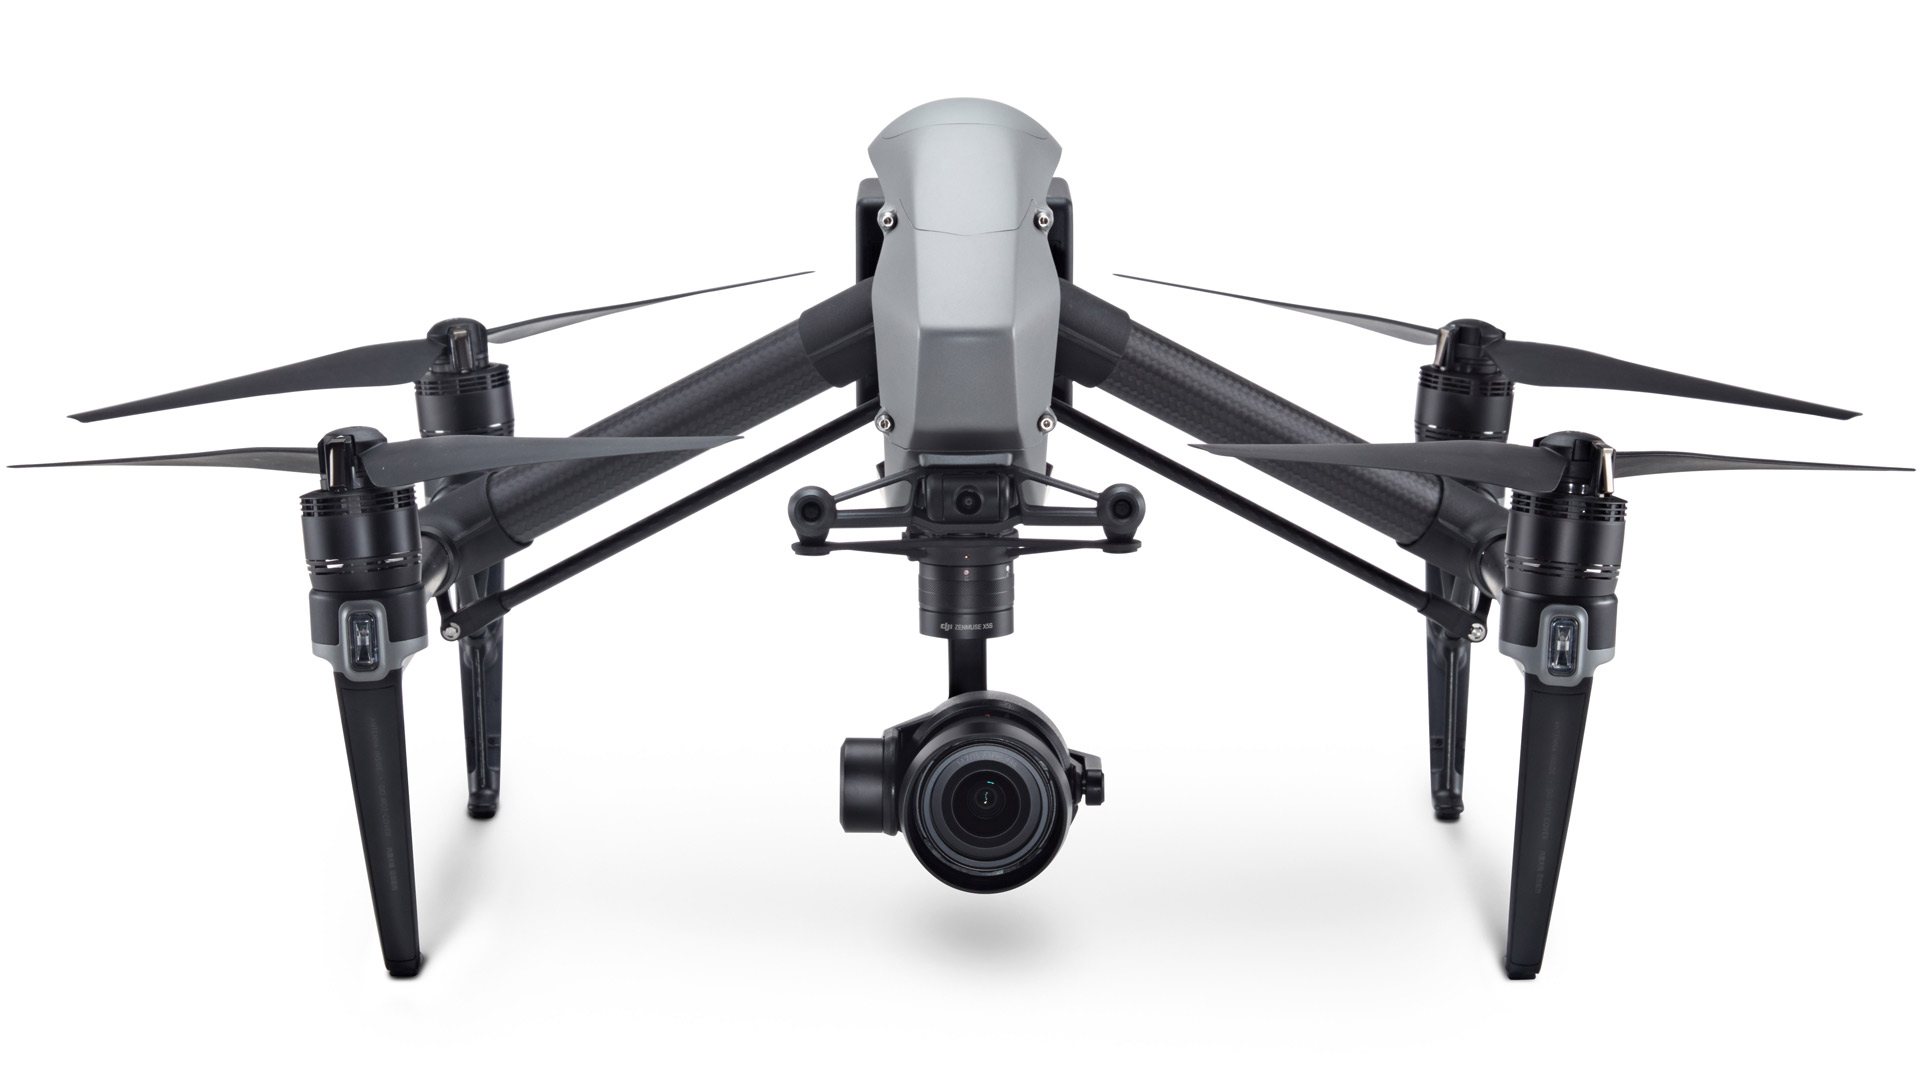 These drones will help you polish your photographic skills